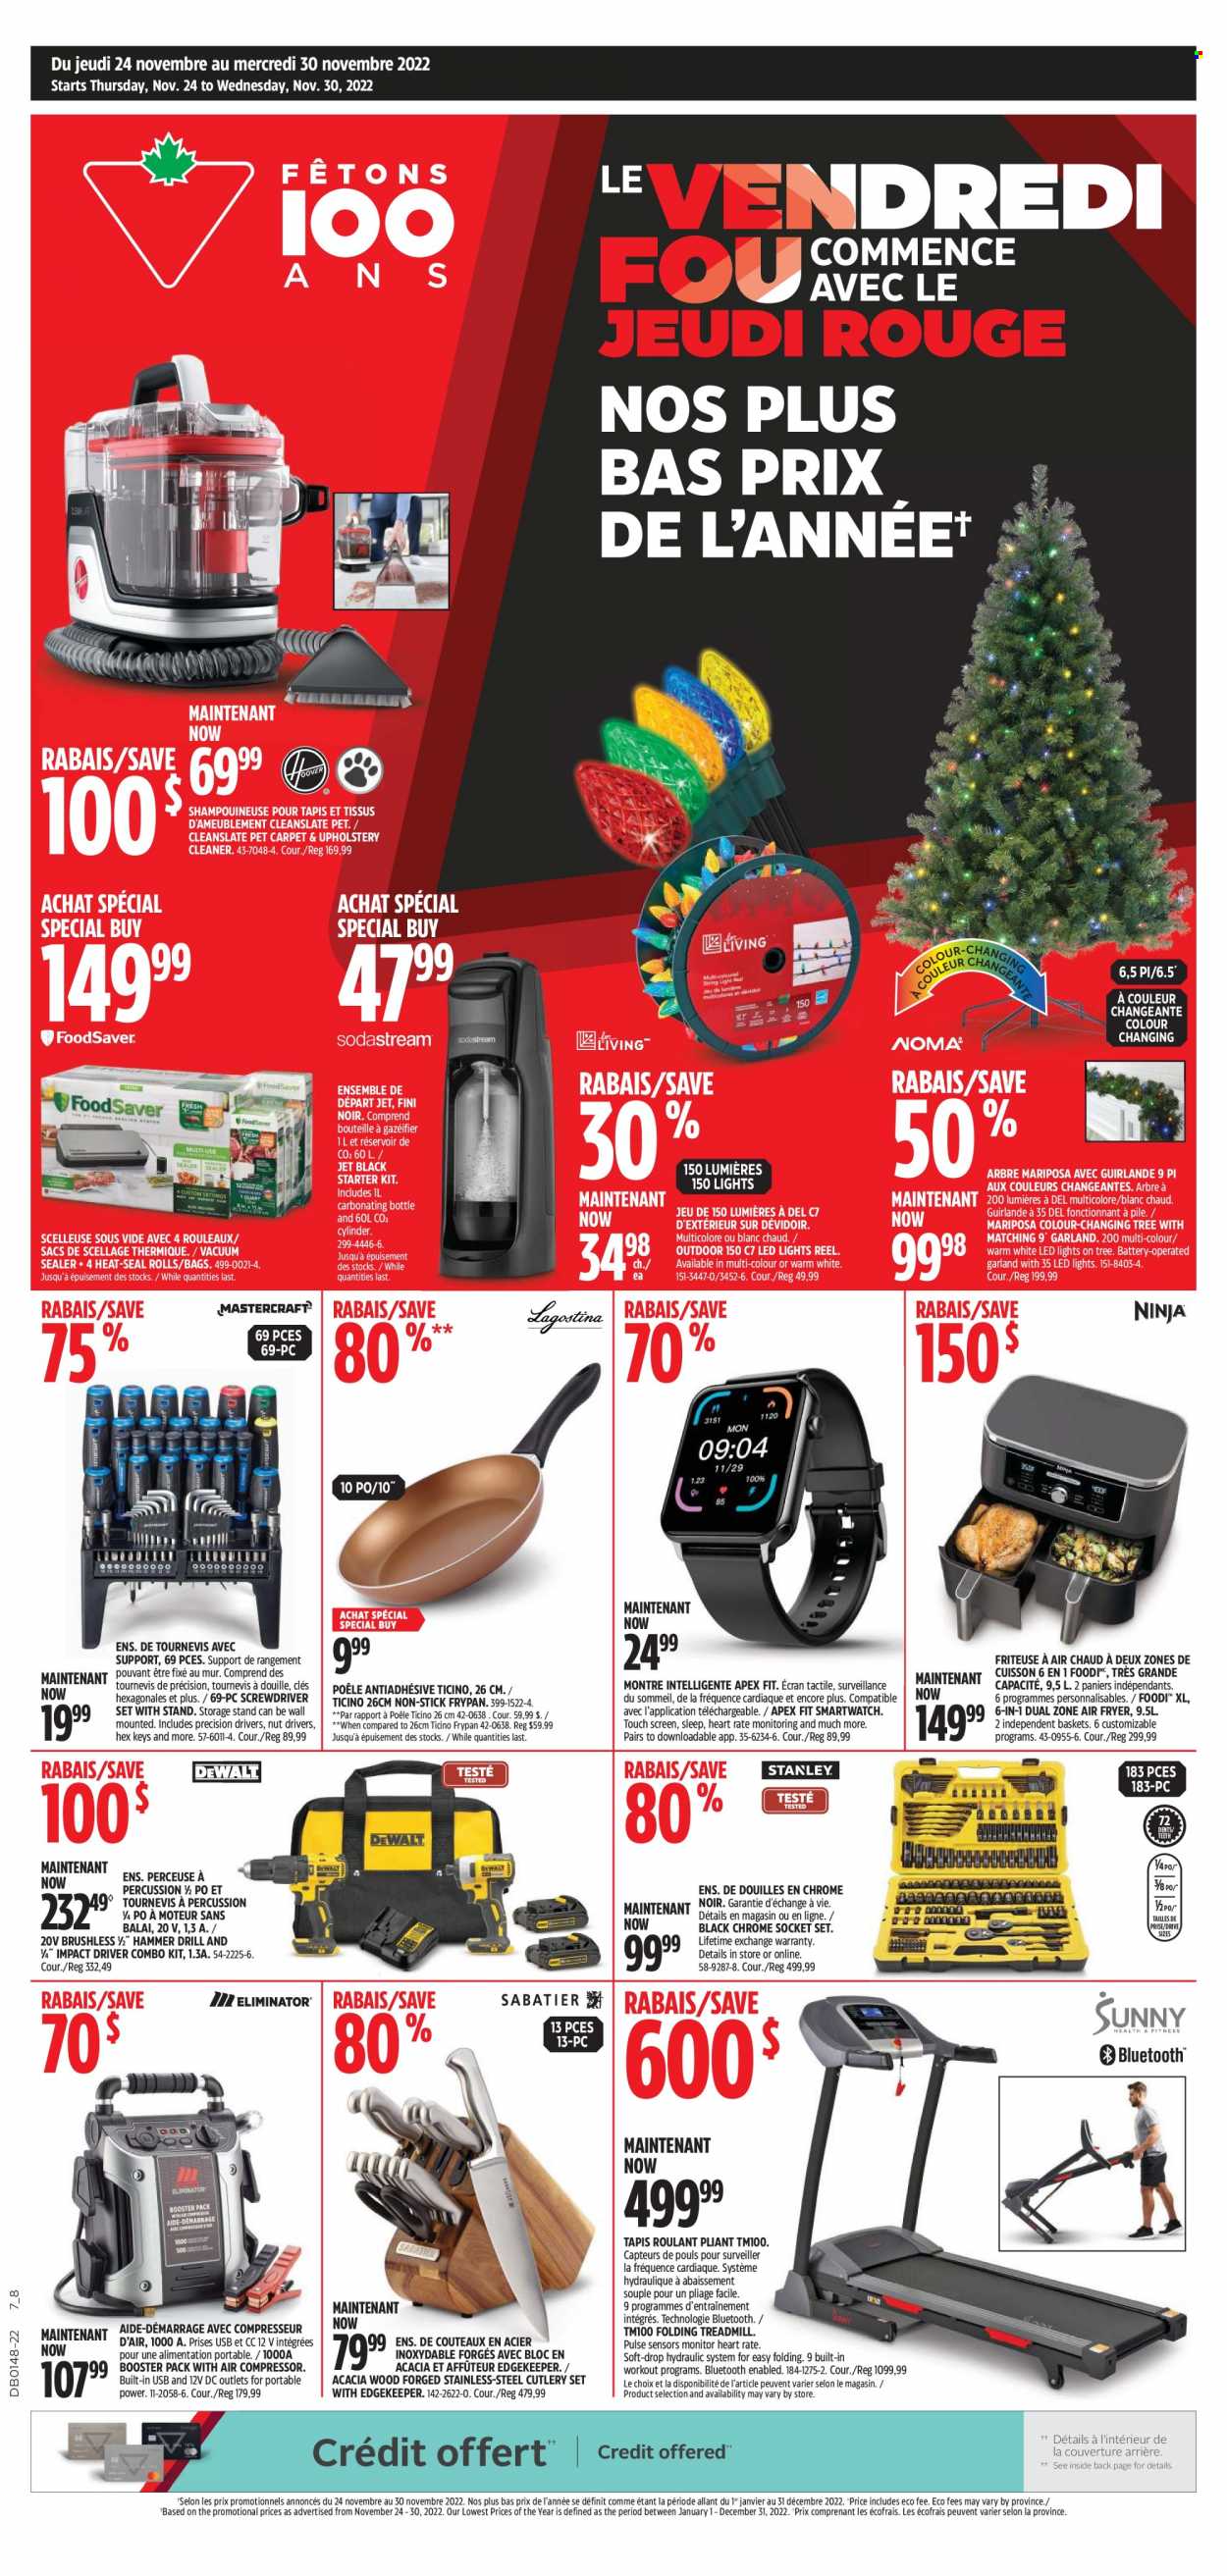 Canadian Tire Flyer - November 24, 2022 - November 30, 2022 - Sales products - cleaner, basket, vacuum sealer, cutlery set, frypan, percussion instrument, air fryer, garland, treadmill, reel, socket, drill, screwdriver, impact driver, socket set, combo kit, screwdriver set, air compressor, monitor. Page 1.